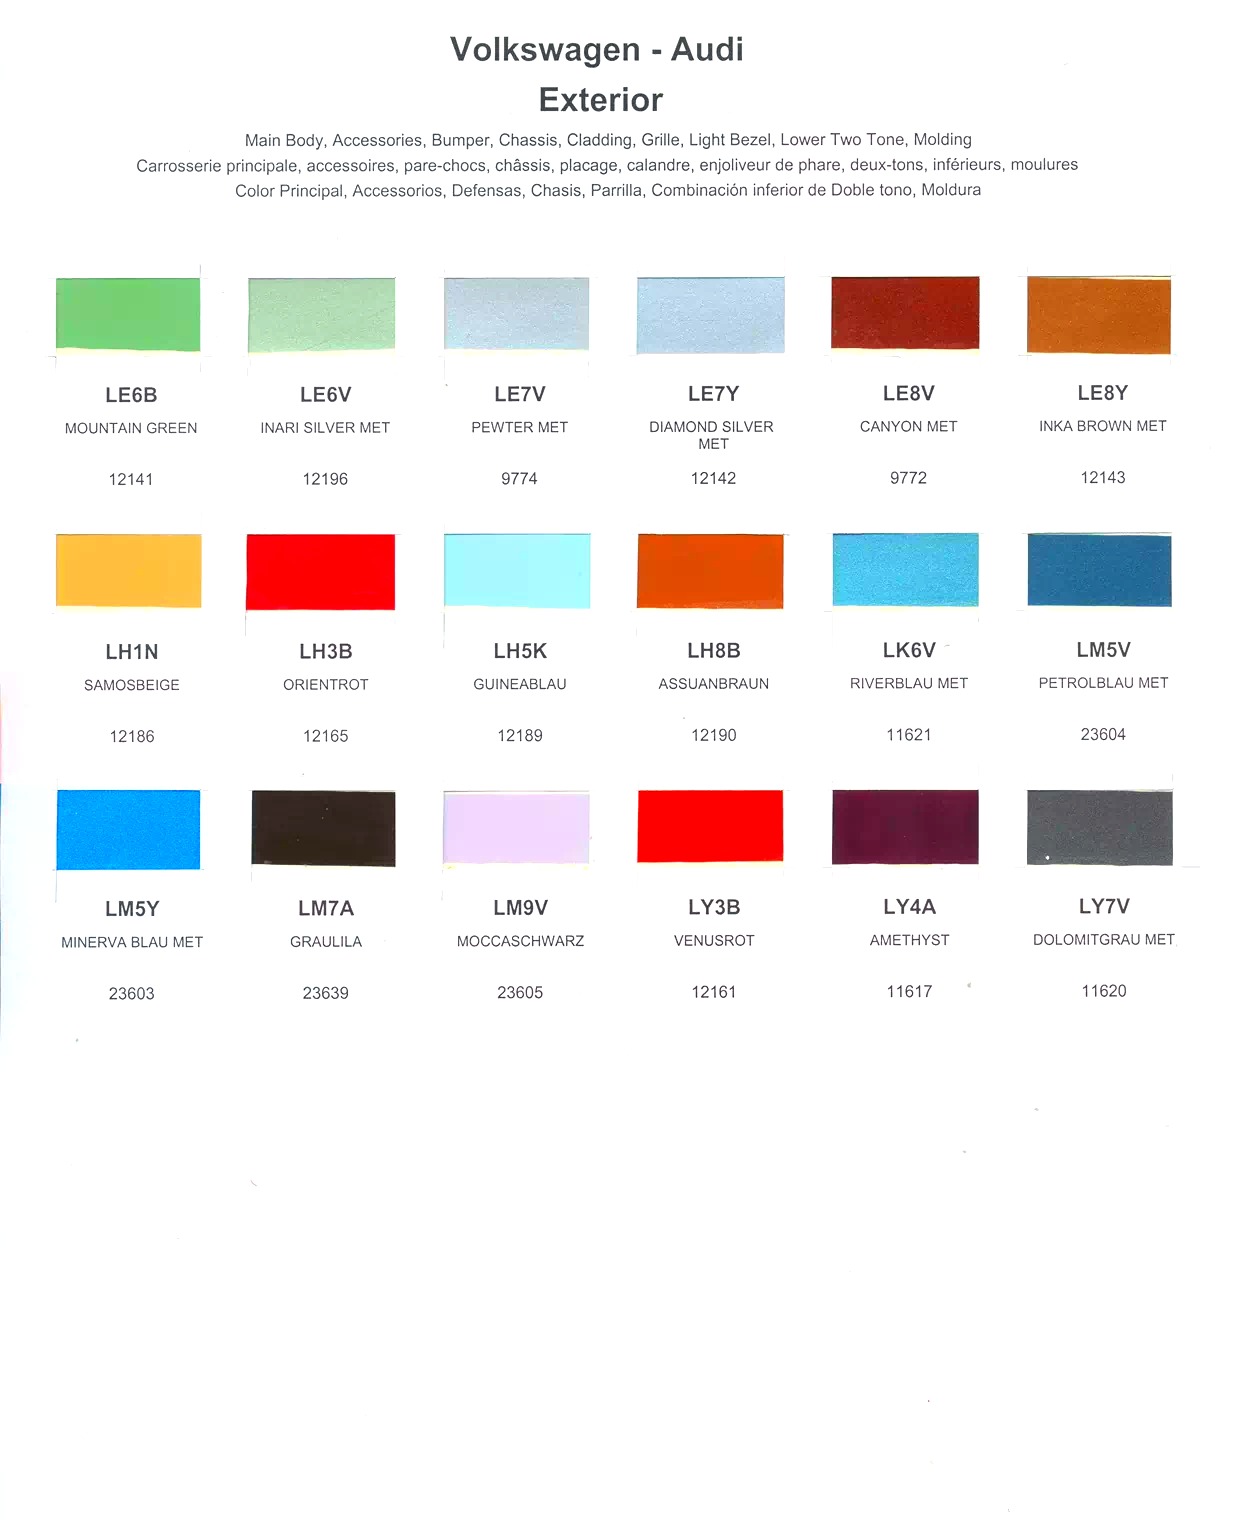 oem paint swatches, basf mixing stock number, oem paint codes & color names for all colors used the on the exterior of 1980 Volkswagen and Audi vehicles